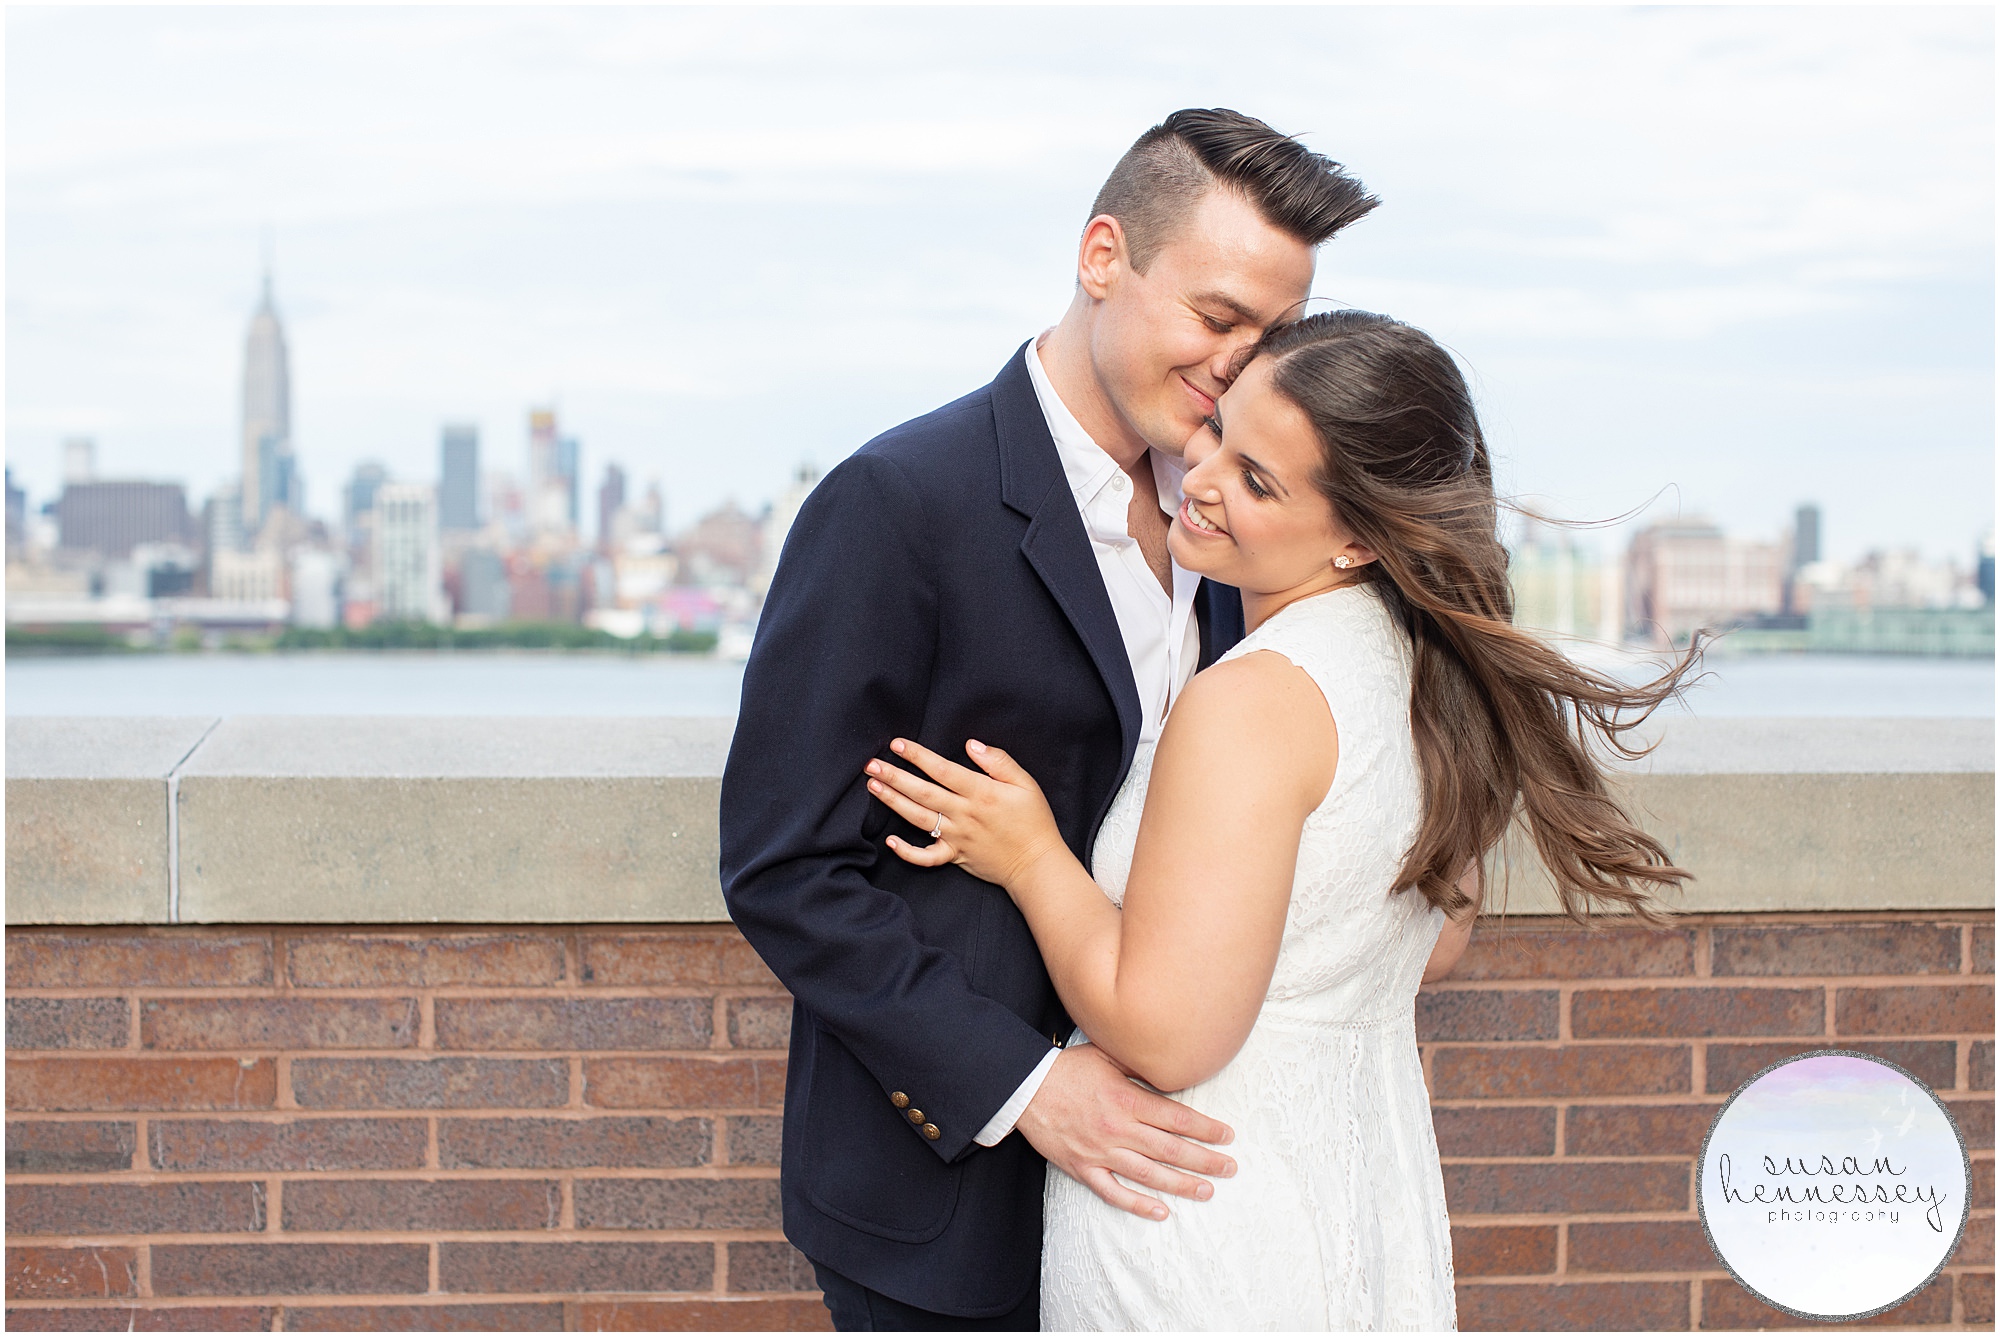 Happy engaged couple in North Jersey for their engagement session